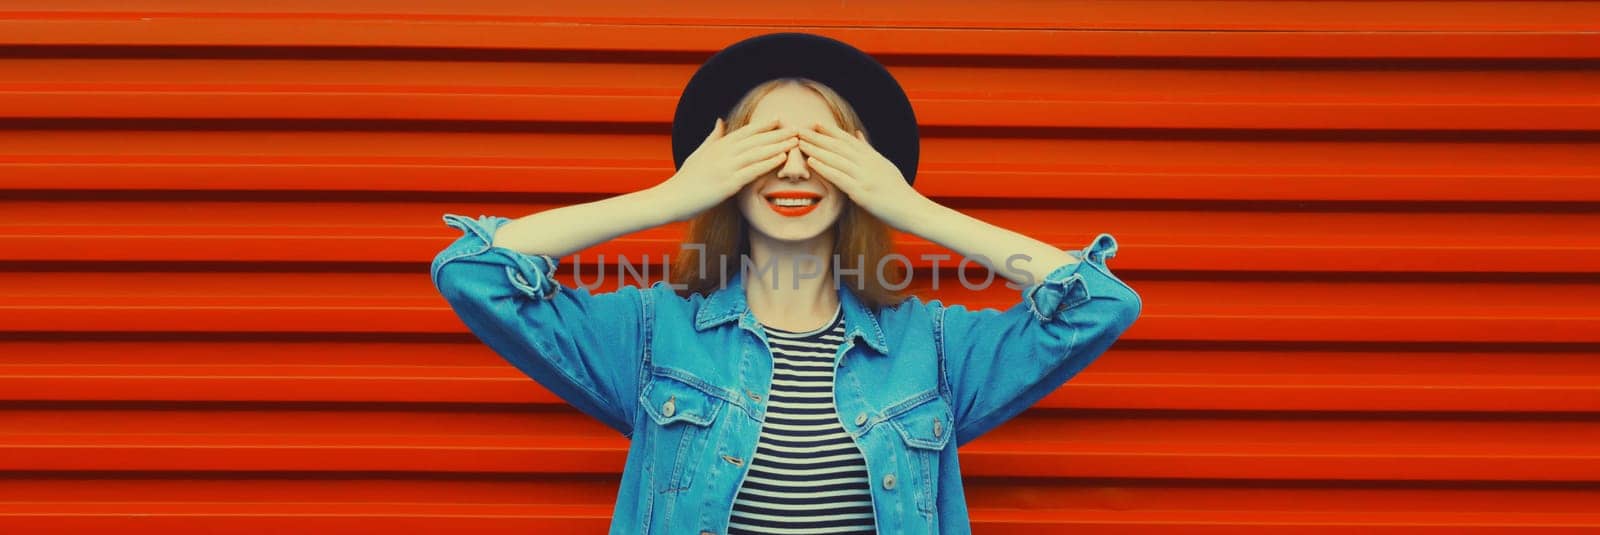 Portrait of happy surprised smiling young woman covering her eyes wearing black round hat, denim jacket on red background